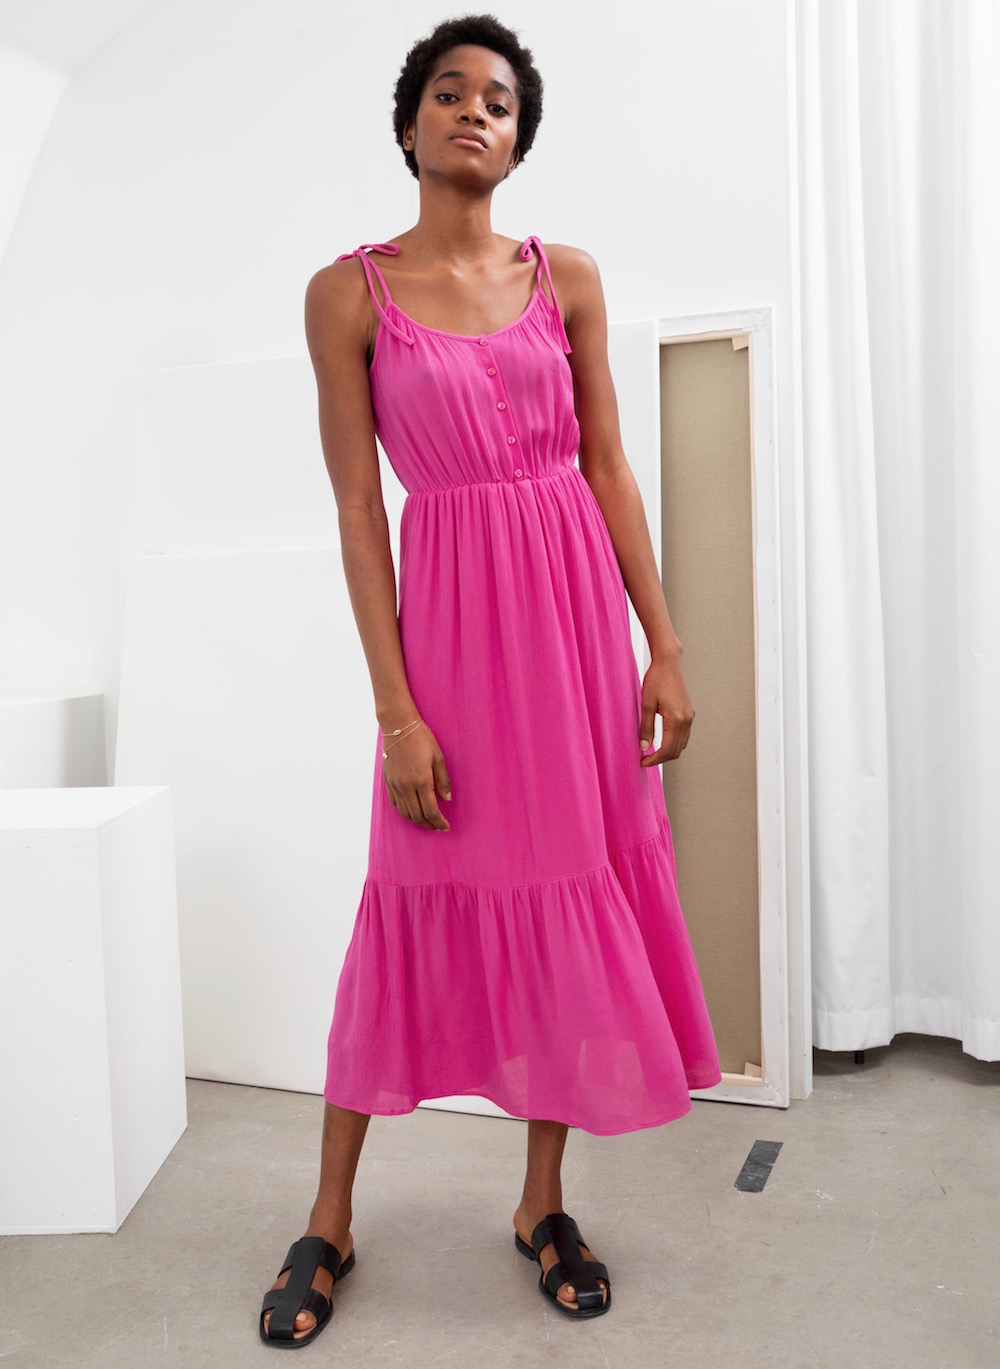 Eveningwear Dresses Are Back and They Got a Major Revamp - theFashionSpot